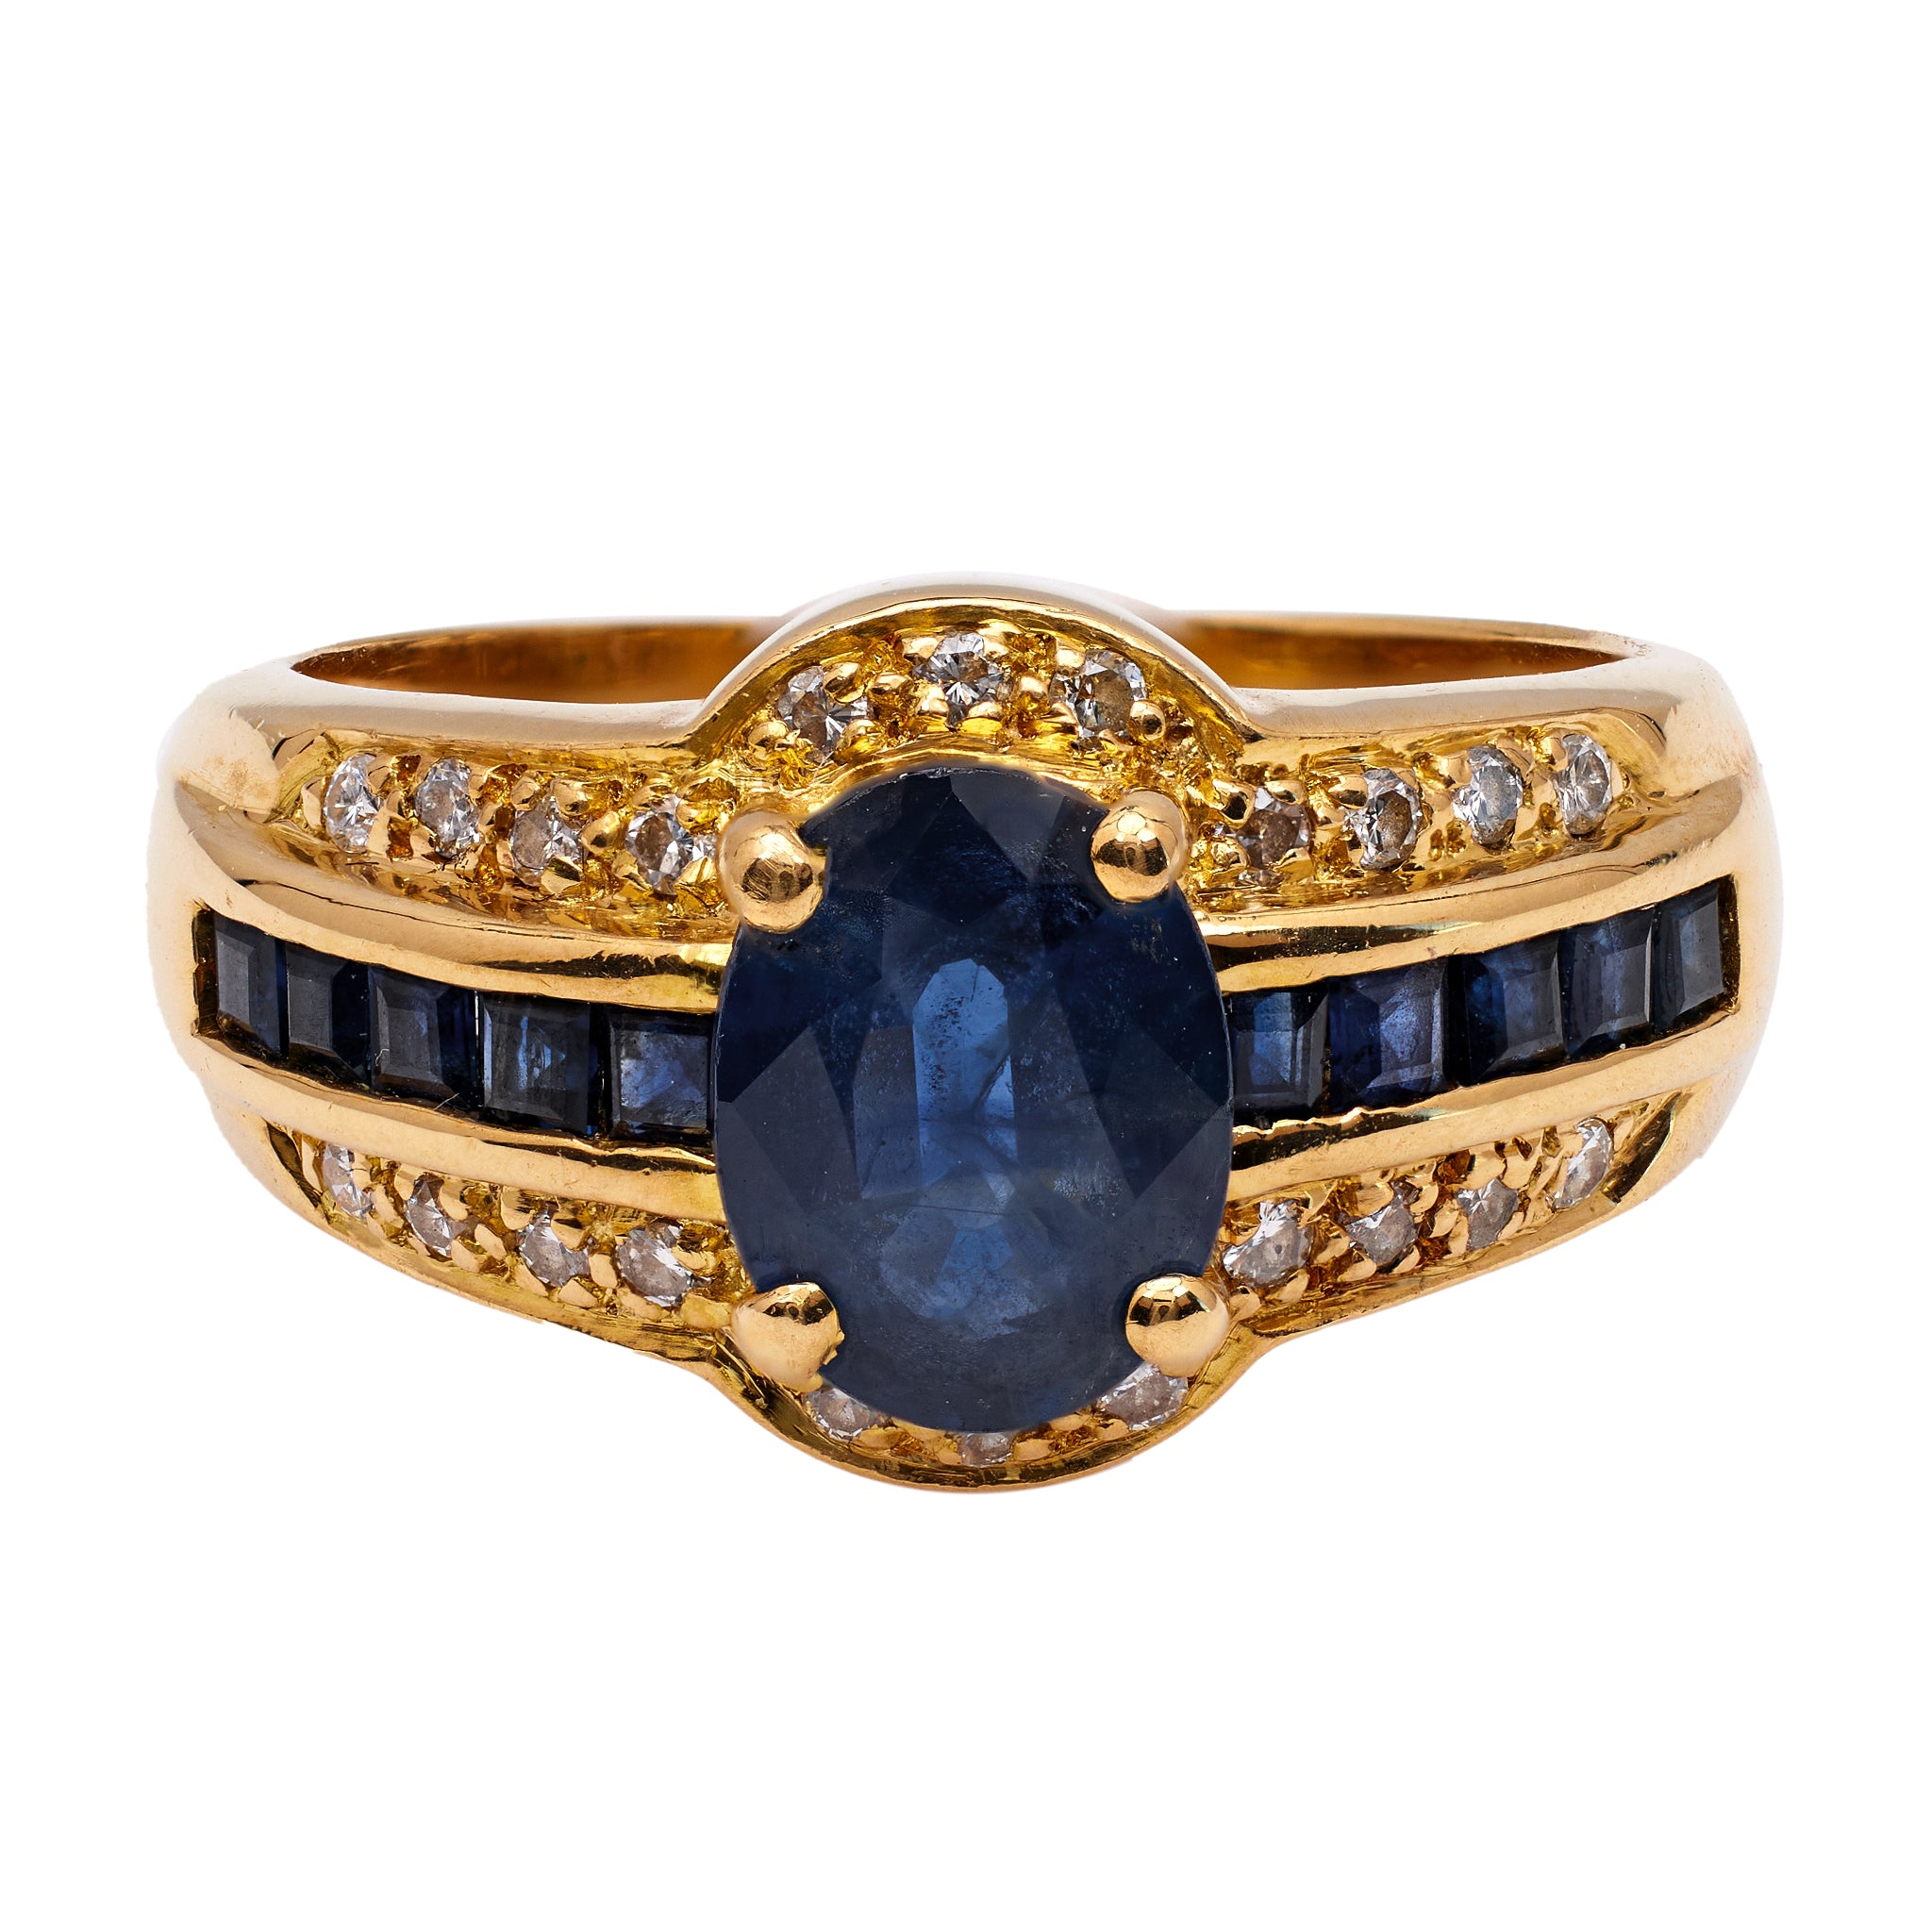 Vintage French Sapphire Diamond 18k Yellow Gold Ring – Jack Weir & Sons